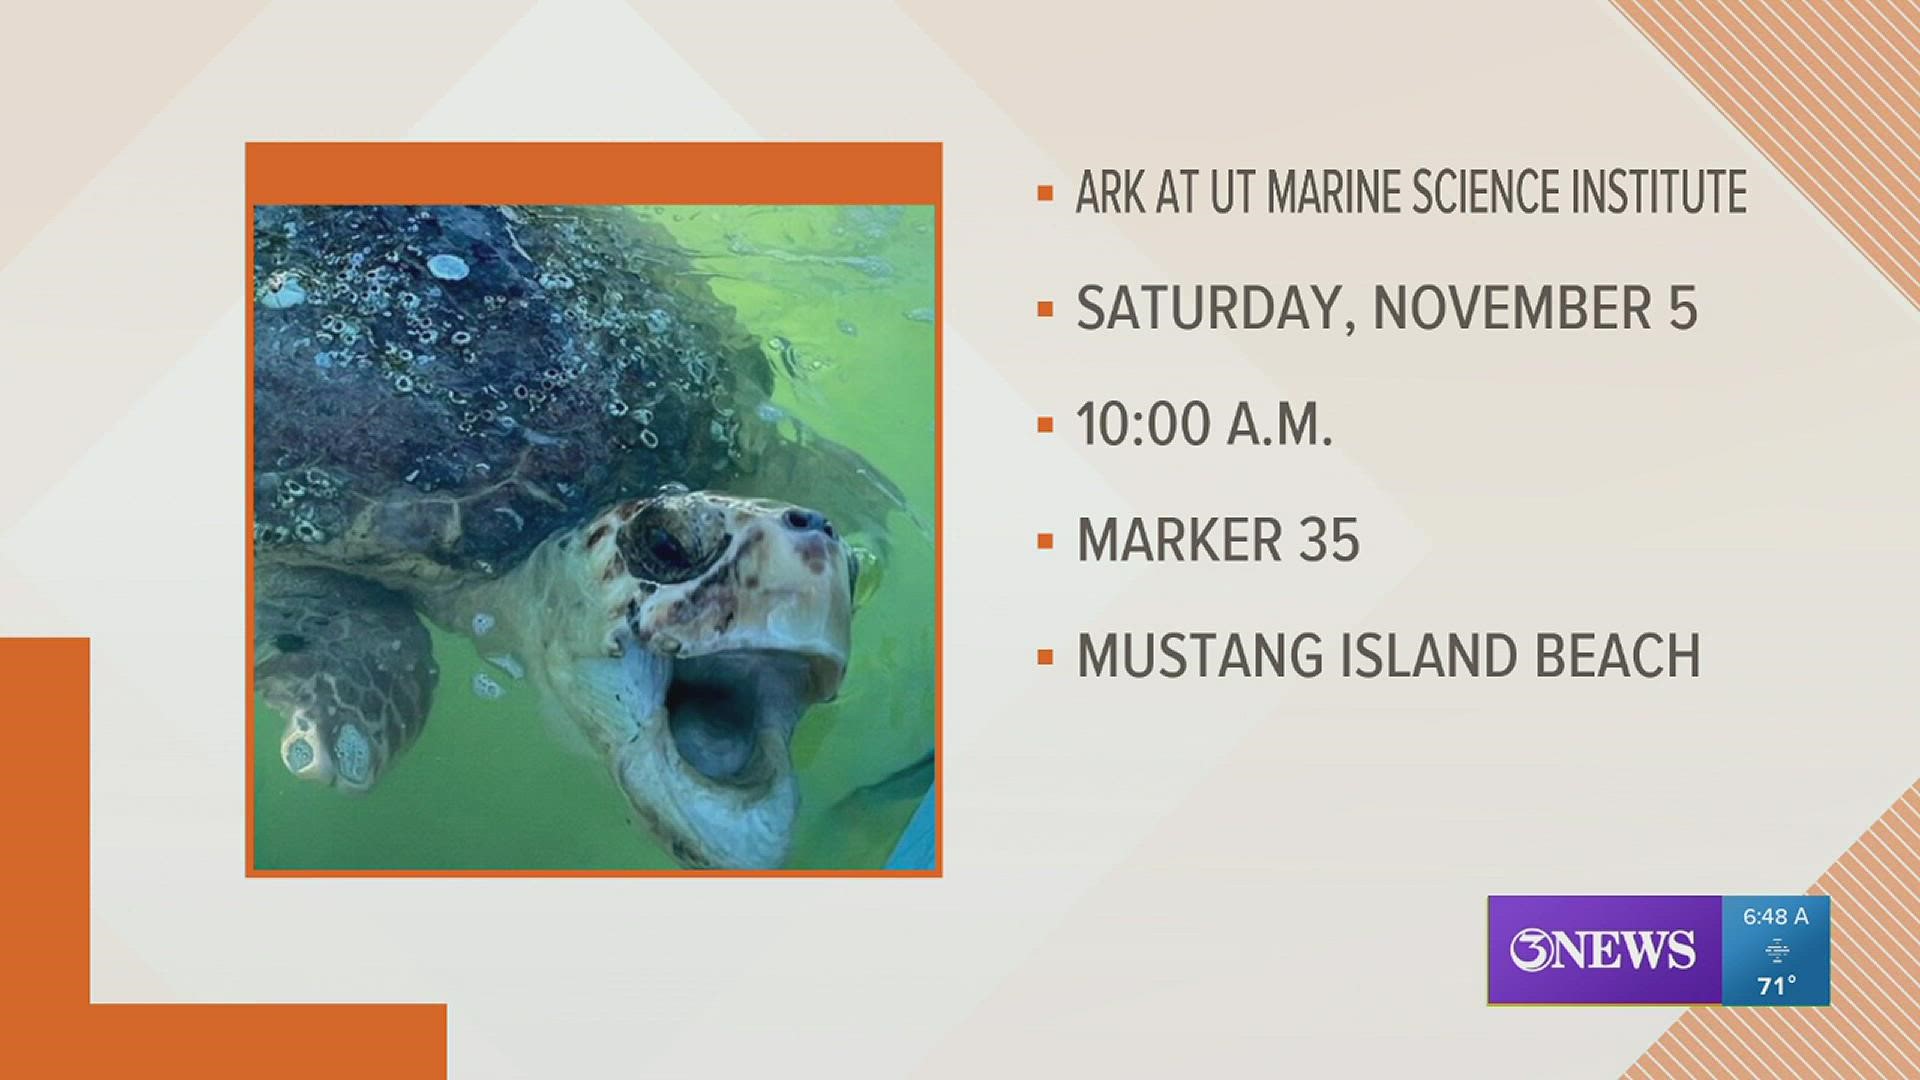 The Amos Rehabilitation Keep invites the Coastal Bend to attend the release of several rehabilitated sea turtles this Saturday on Mustang Island Beach.